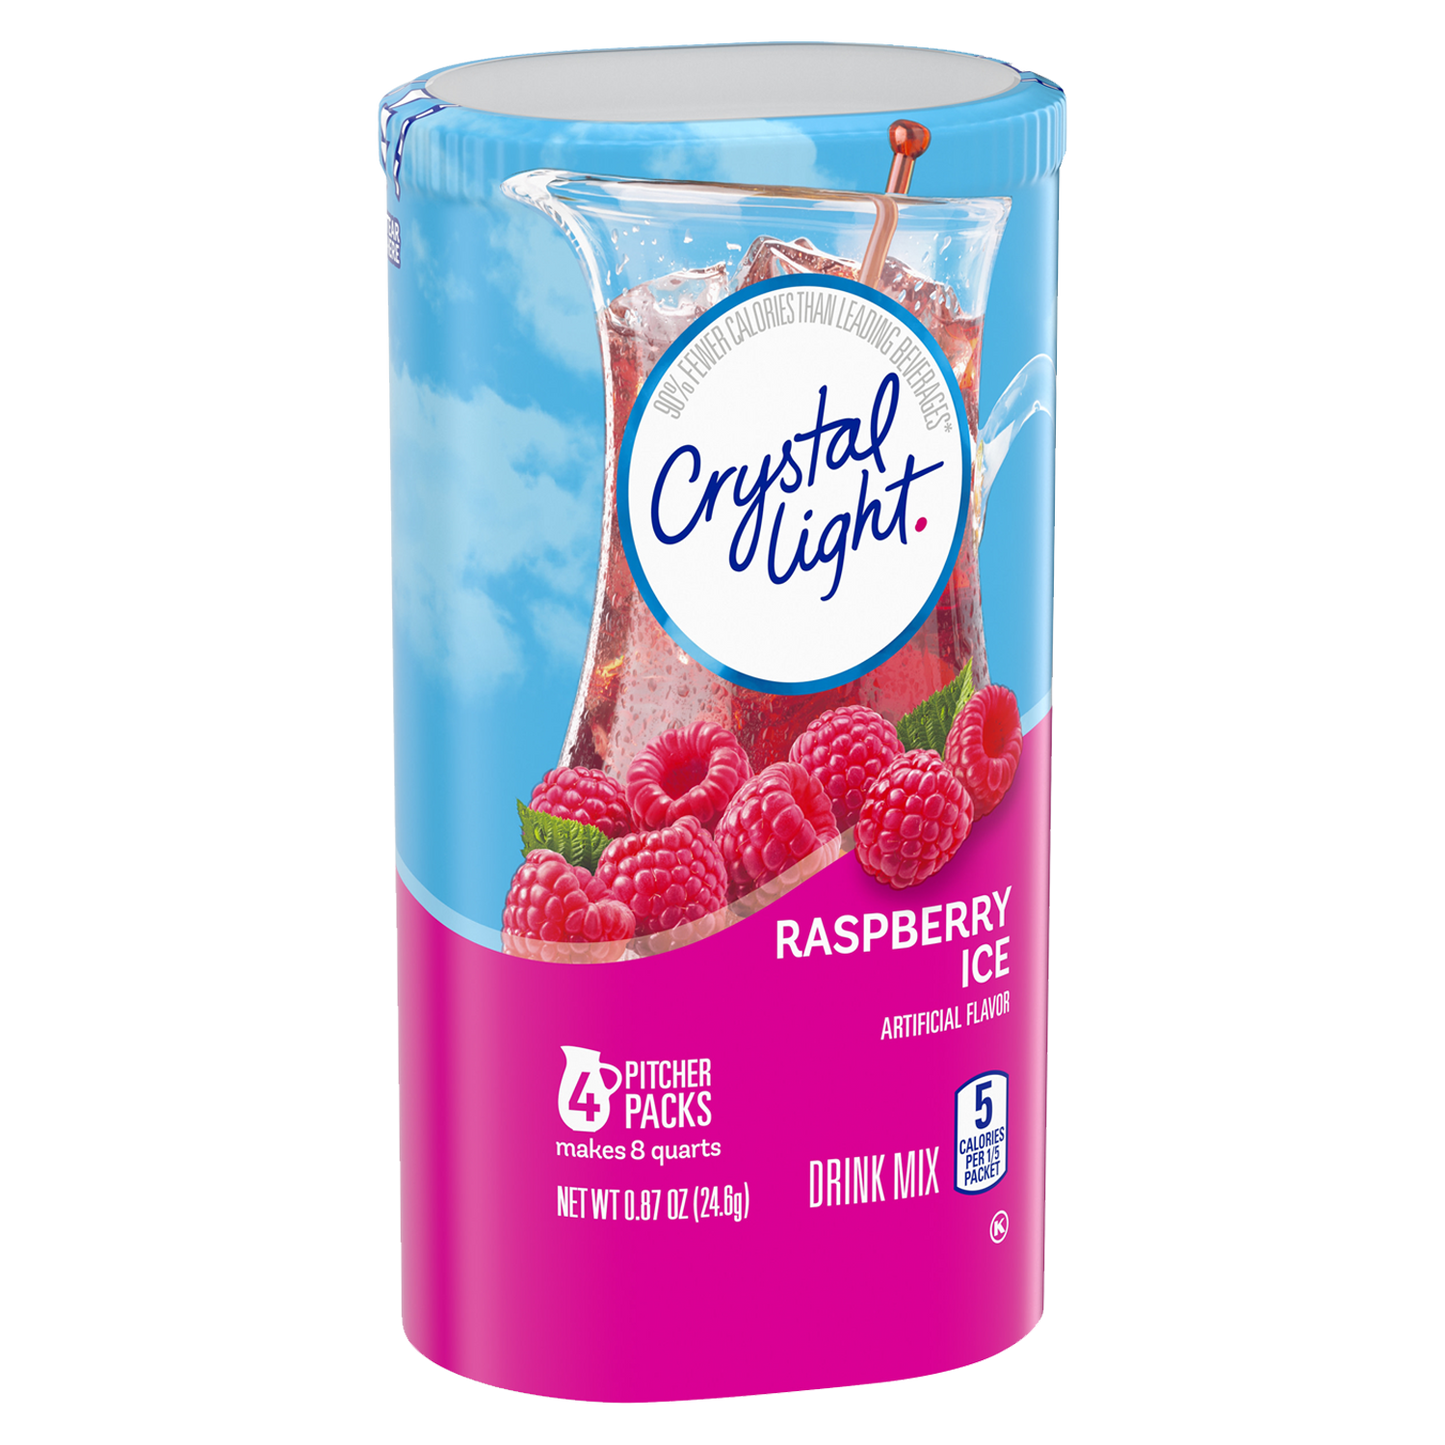 Crystal Light Raspberry Ice Drink Mix 24.6g sold by American grocer Uk